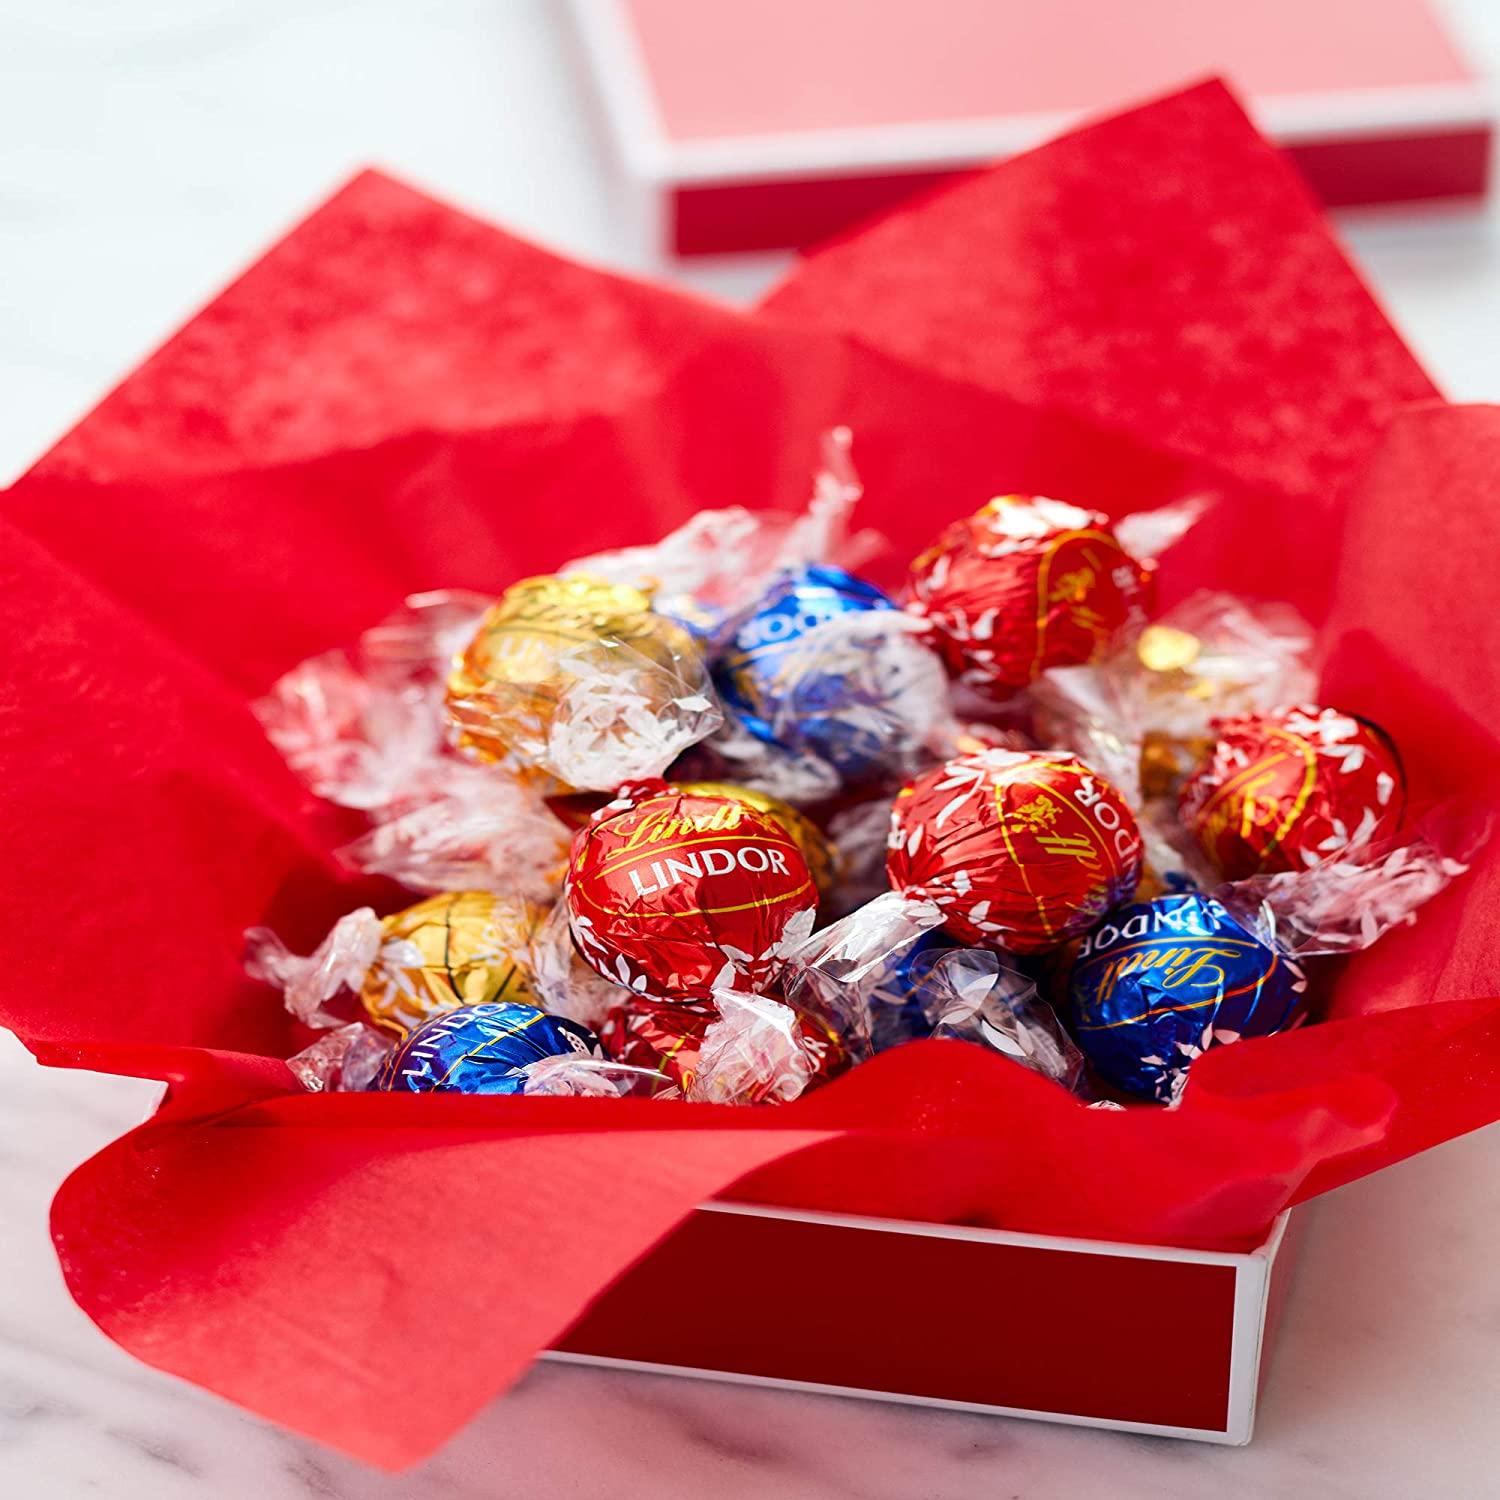 Lindt LINDOR Milk Chocolate Candy Truffles, Valentine's Day Chocolate, 25.4  oz., 60 Count